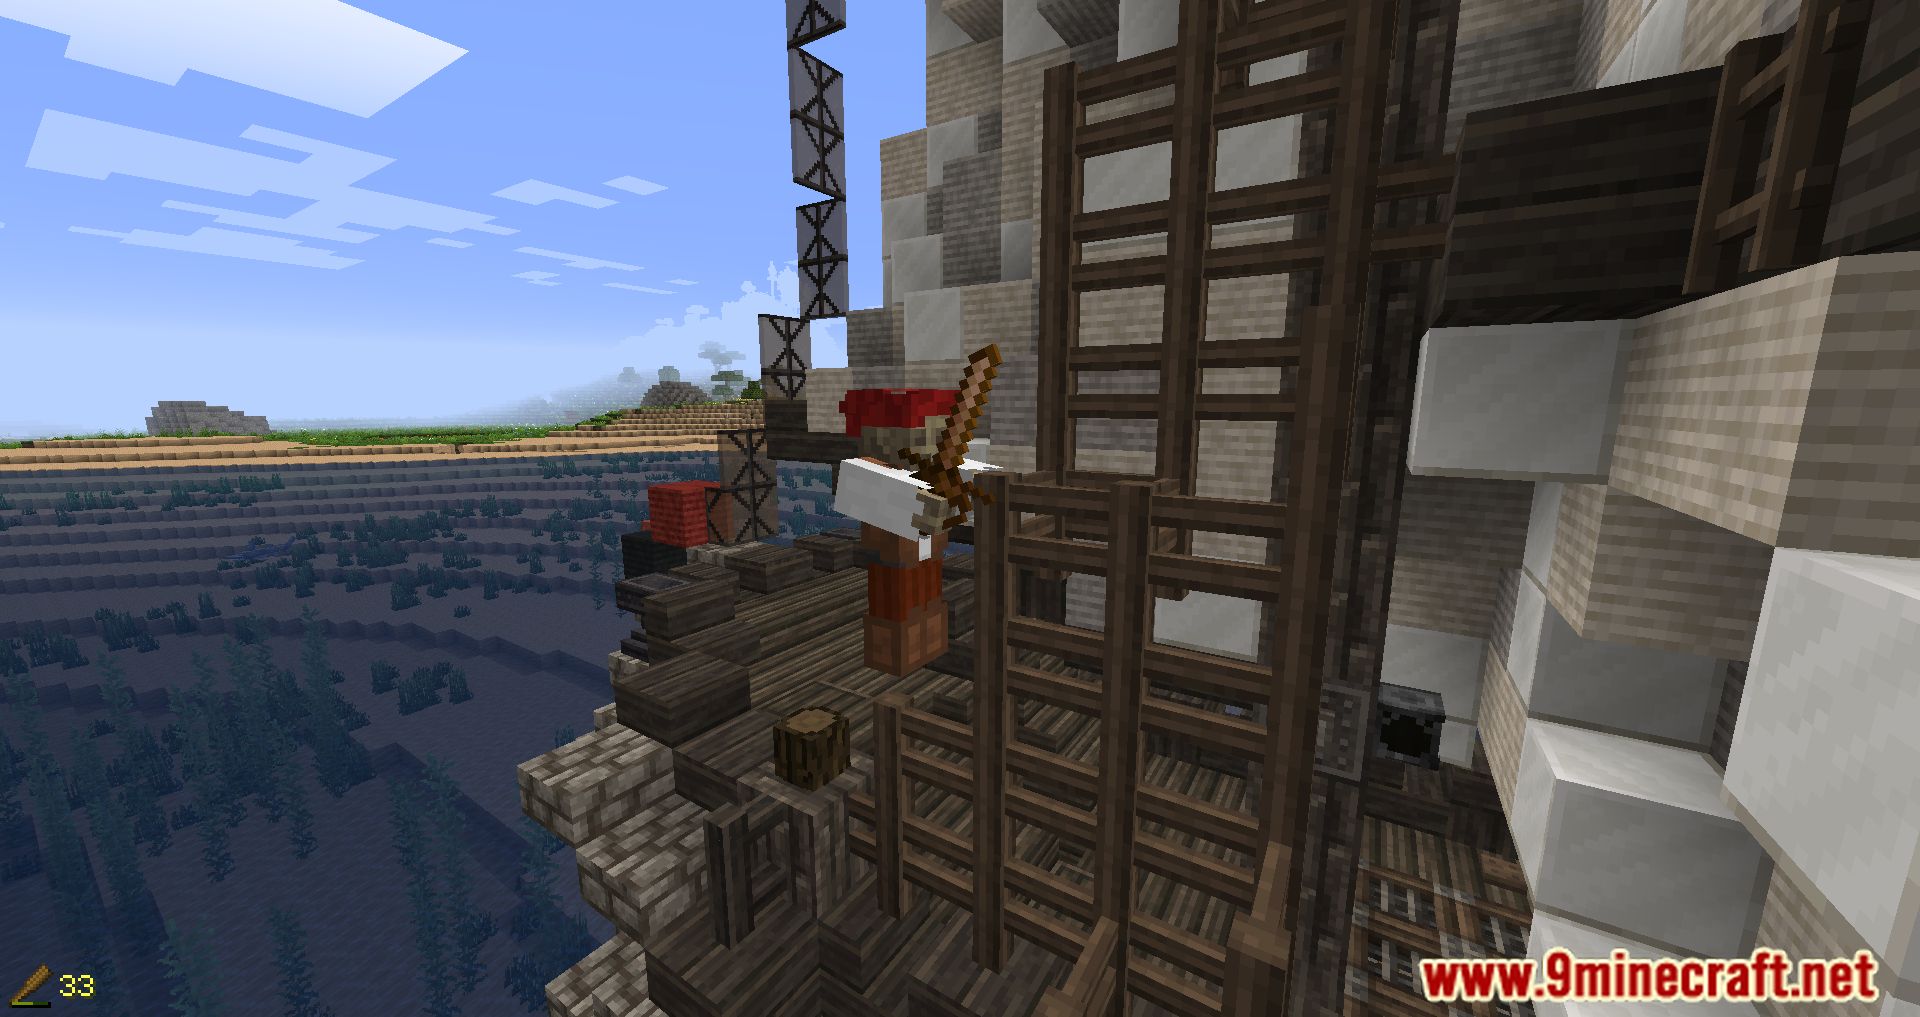 Corsair: The Seven Treasures Modpack (1.16.5) - Pirates, Riches, and Adventures 23